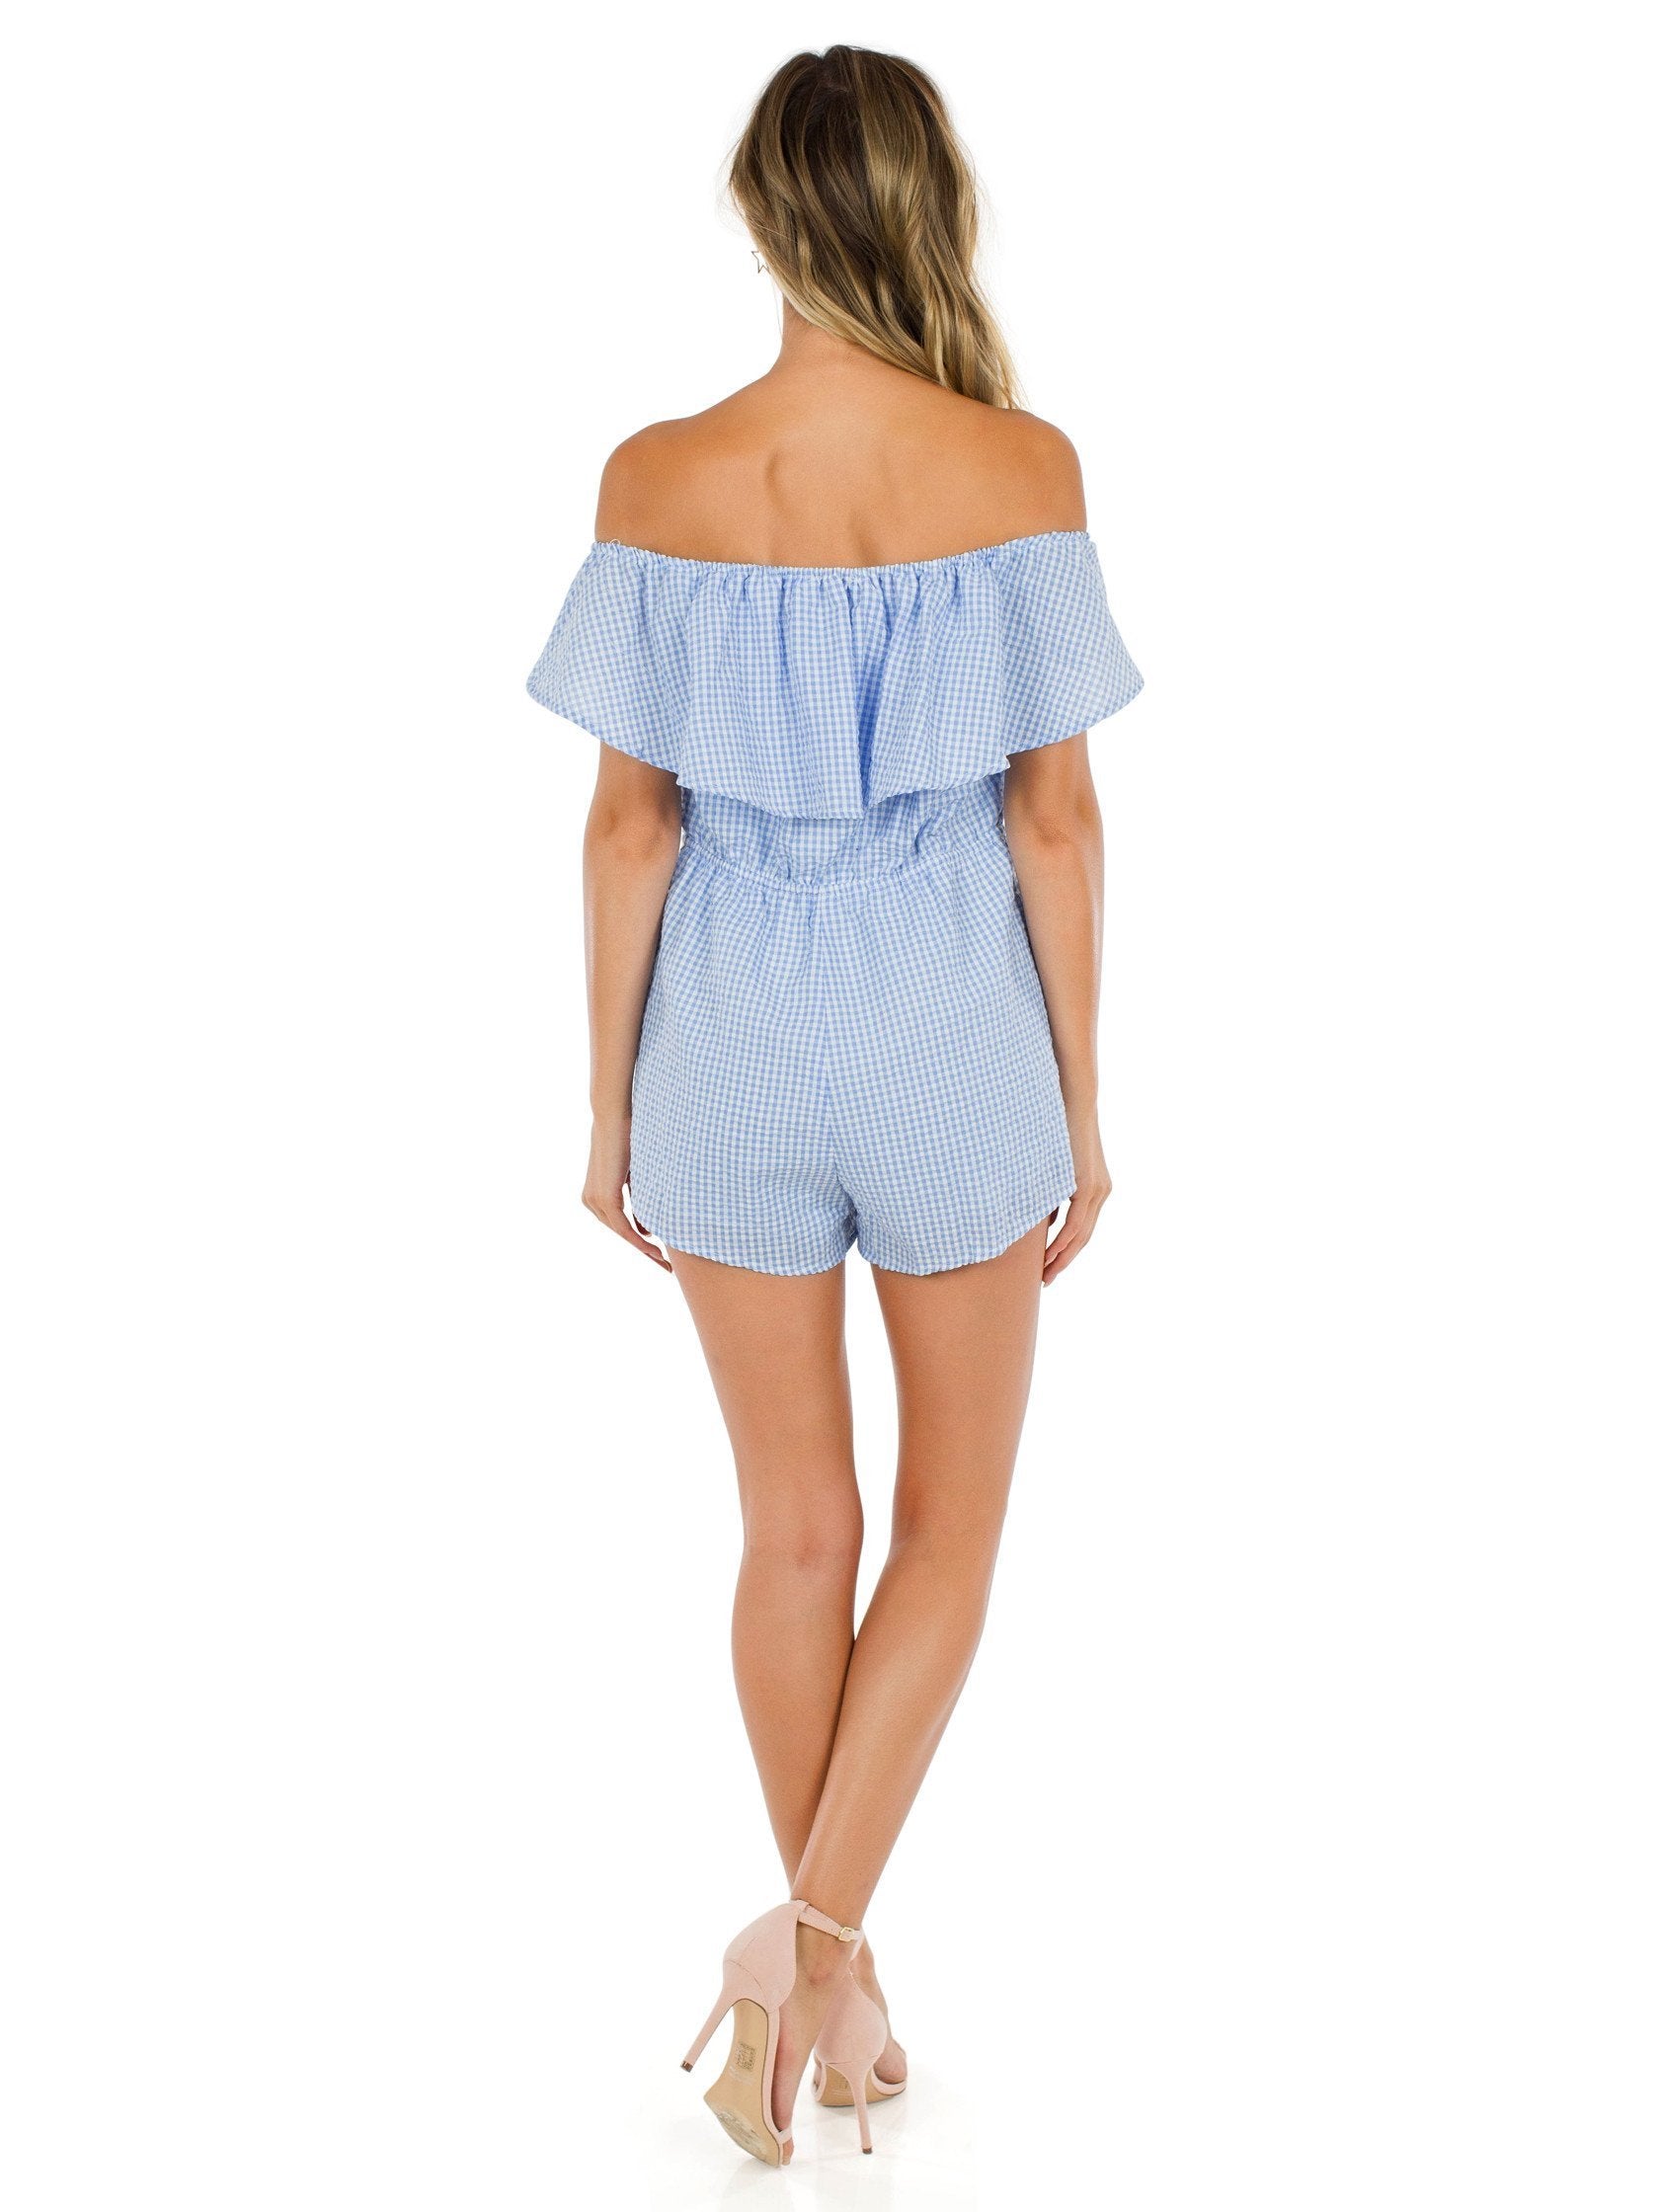 Women wearing a romper rental from FashionPass called Going Gingham Romper